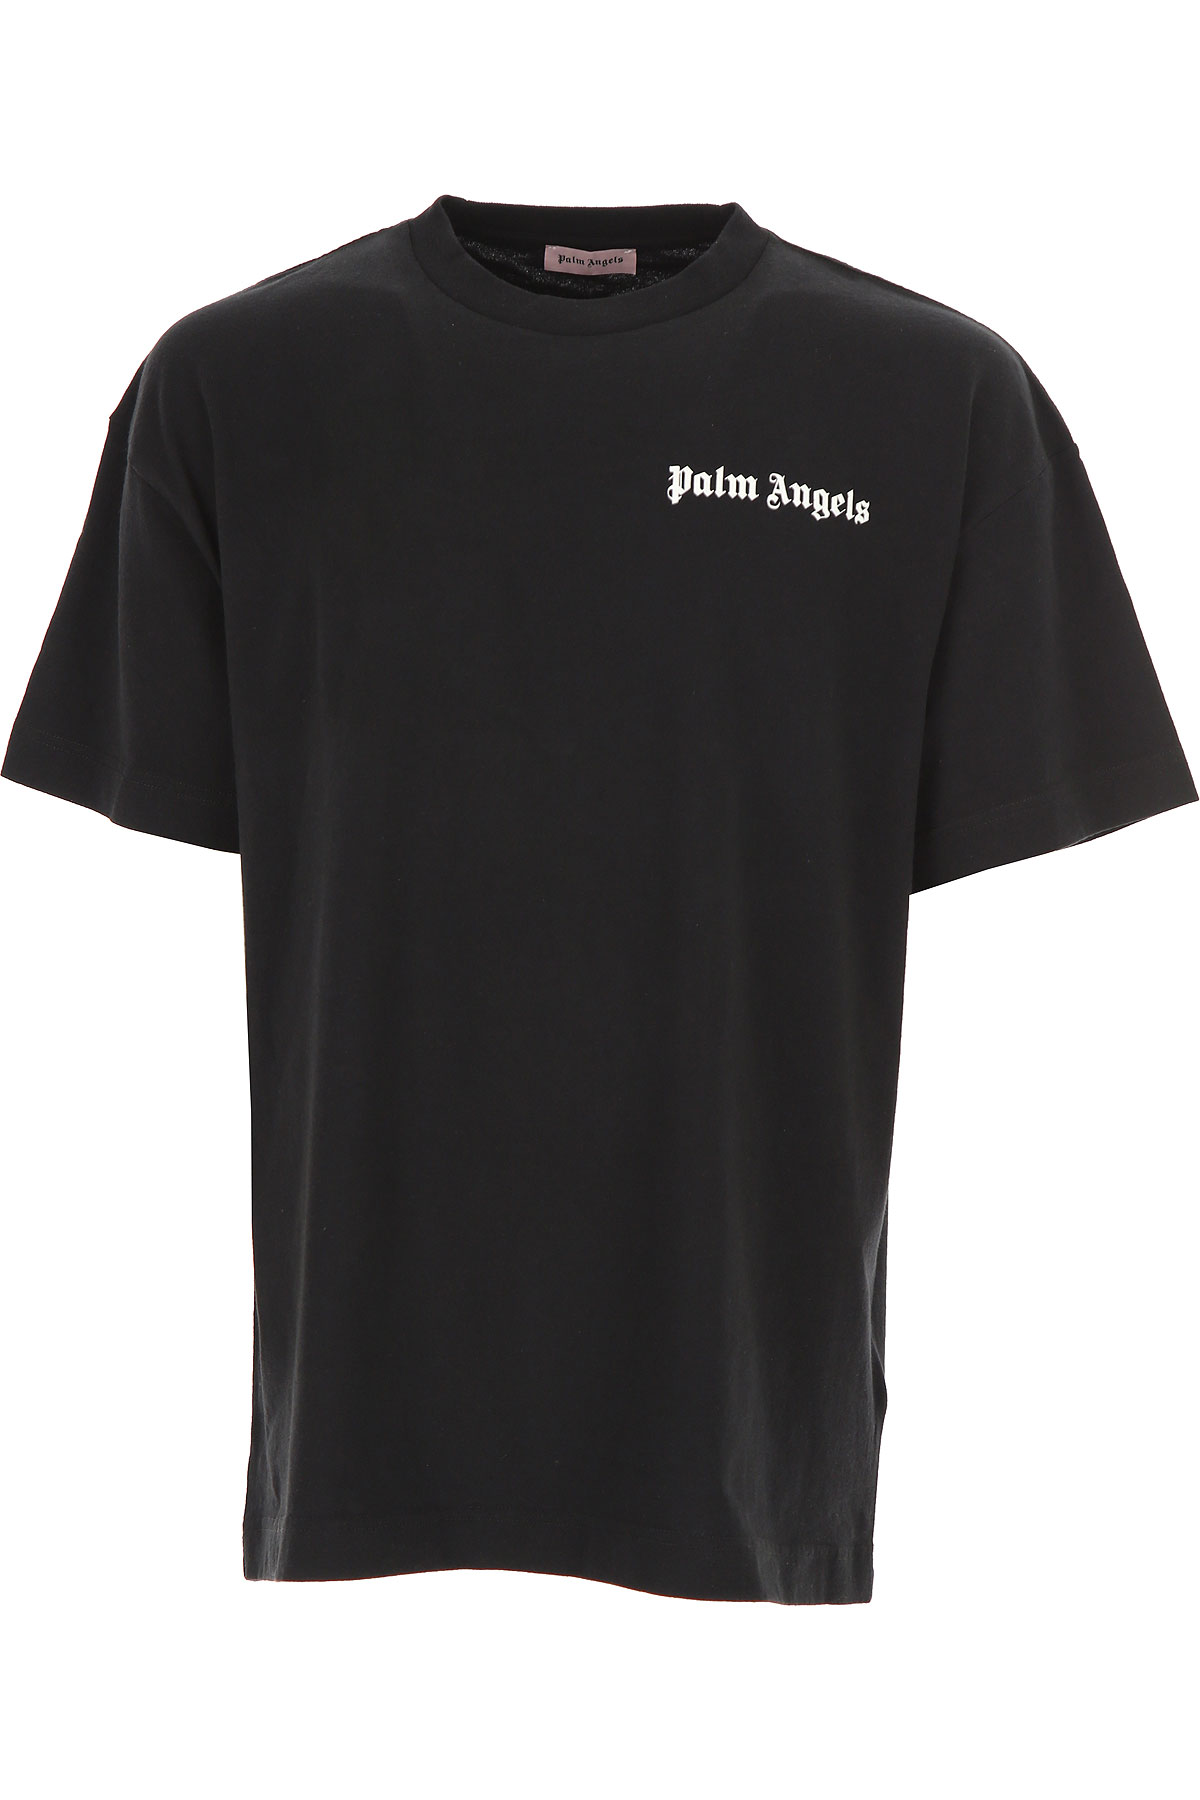 Mens Clothing Palm Angels, Style code: pmaa001s194130081001--